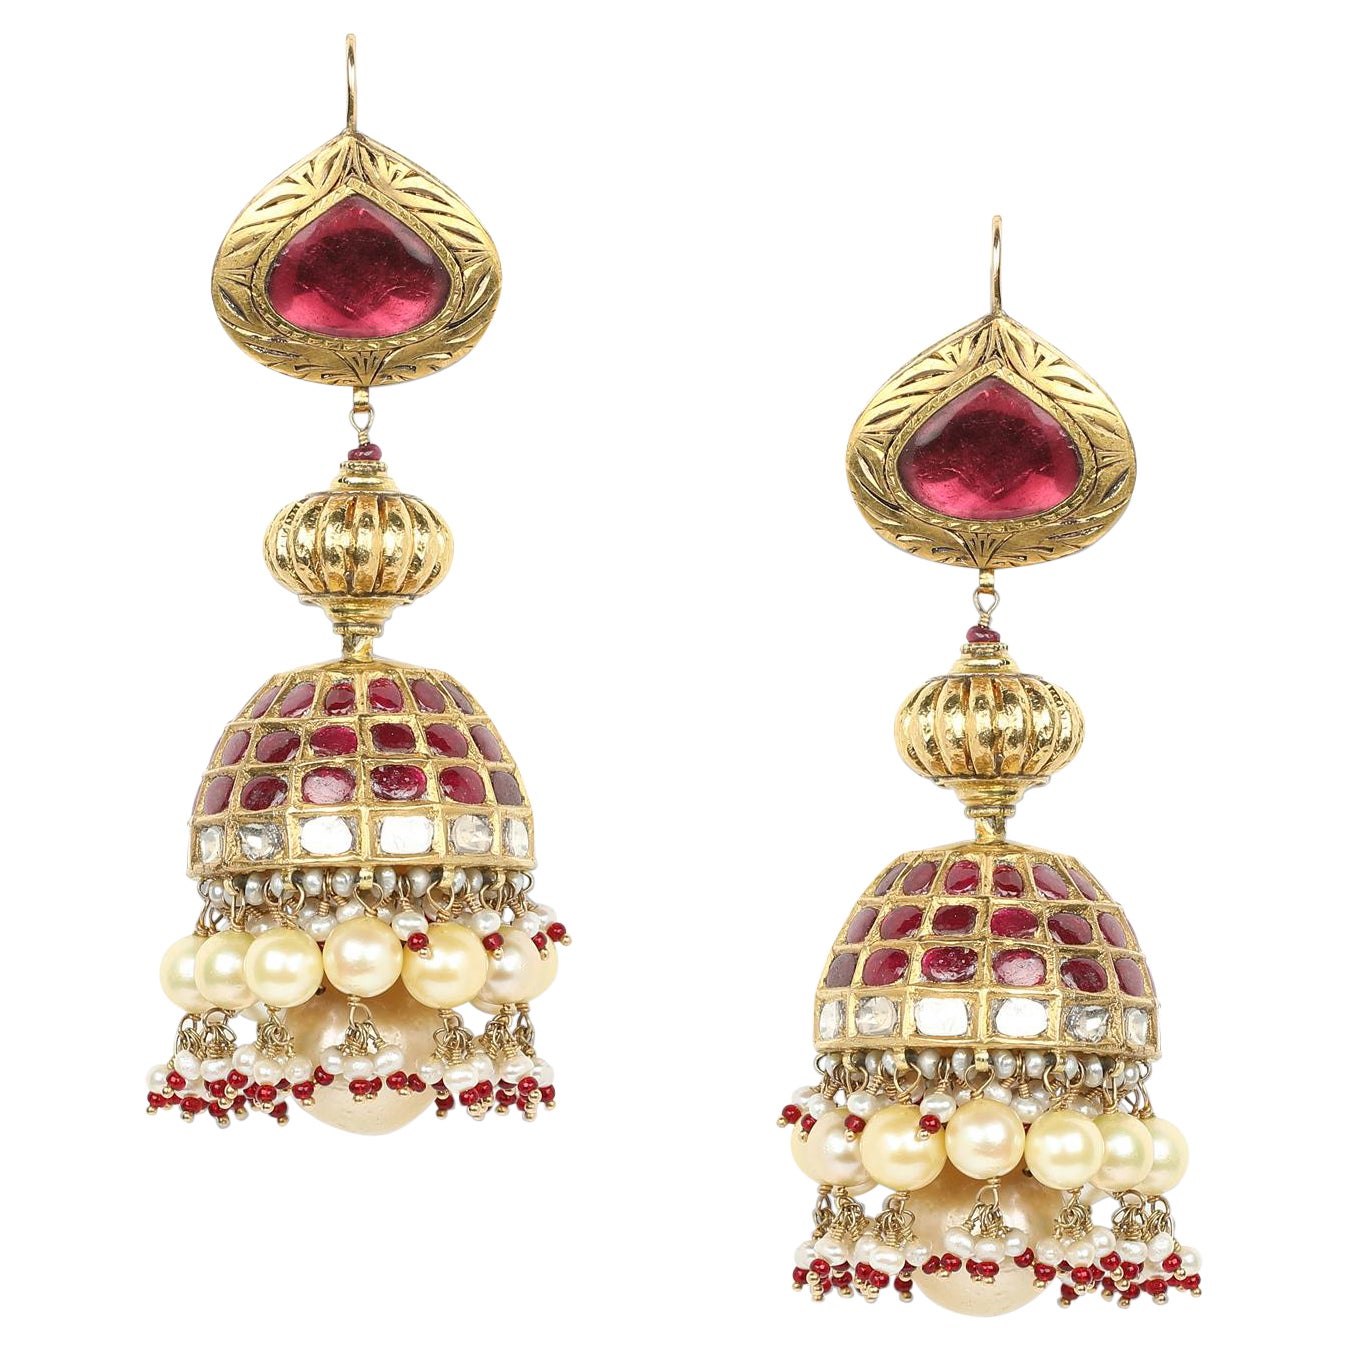 Lal pari jhumkas with rubies, pearls and polki by Vintage intention For Sale